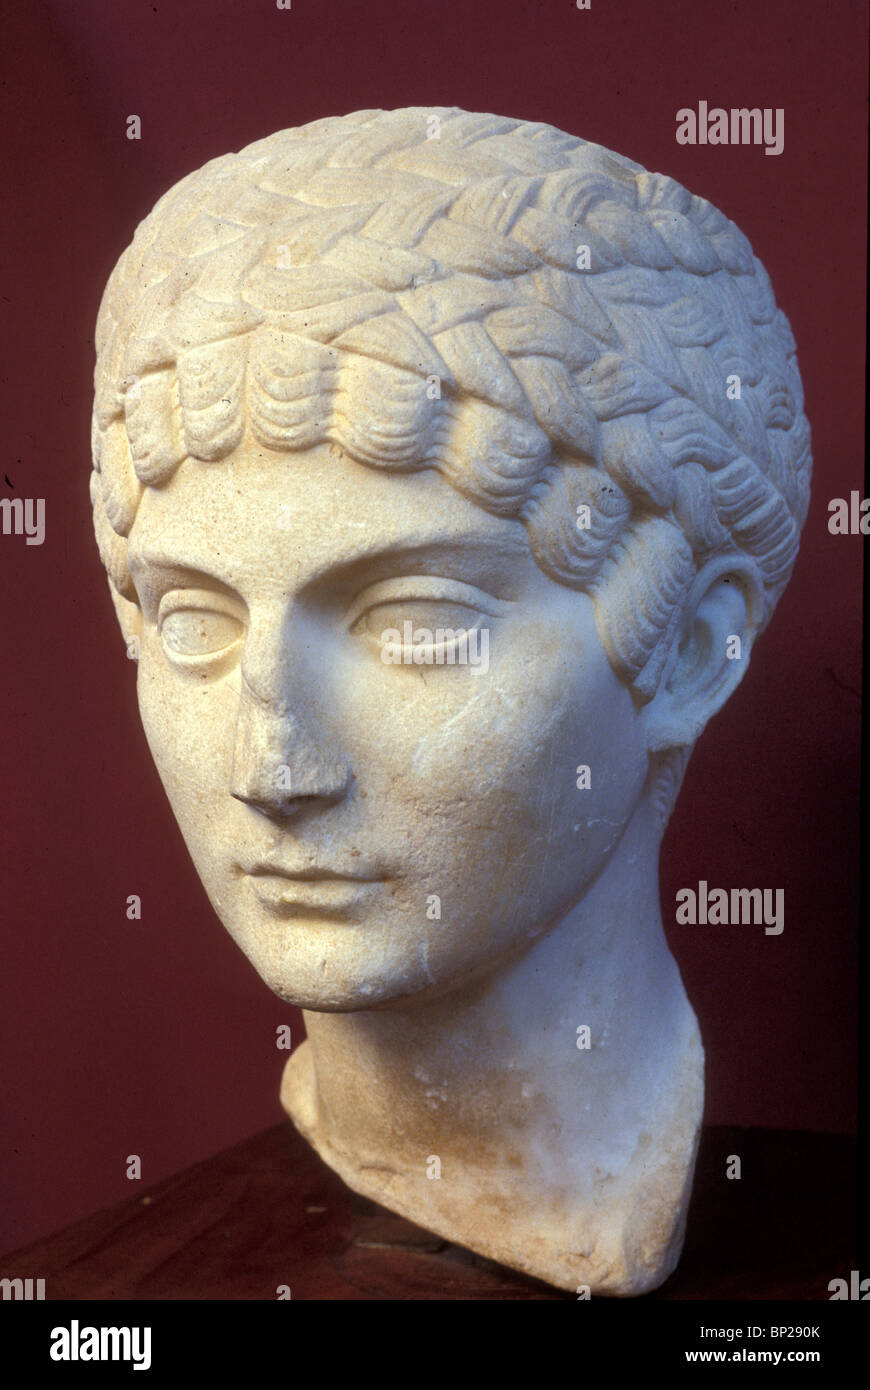 2458. MARBLE STATUTE OF A ROMAN LADY WITH A VERY SPECIAL HAIRSTYLE Stock Photo